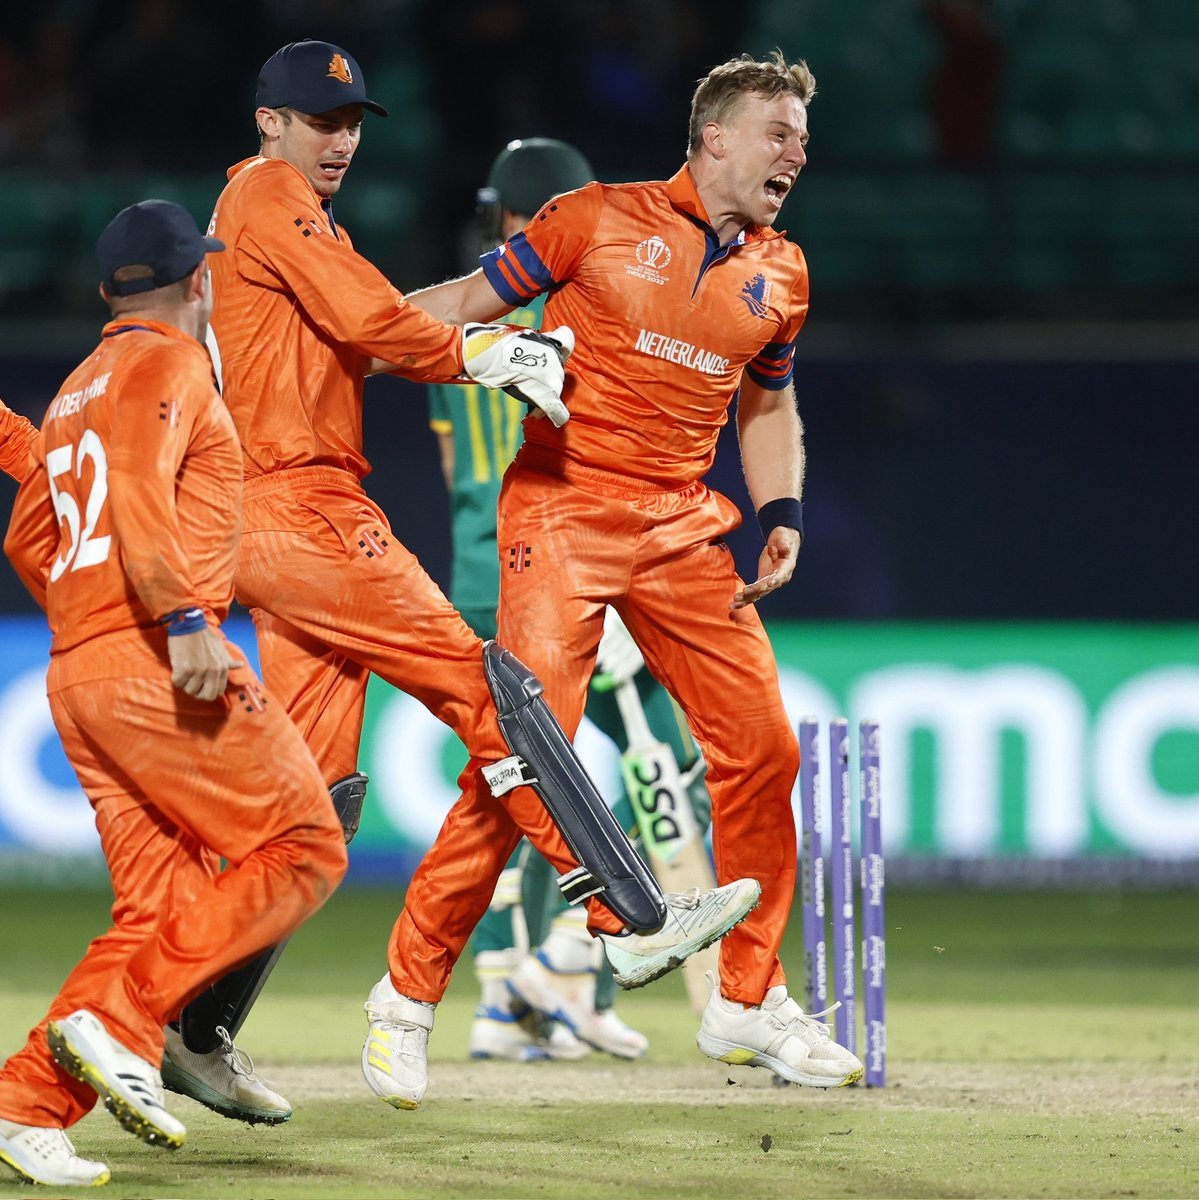 LVB takes wicket number 1️⃣0️⃣ and brings in the historic win🎊🎉 Kudos to the fight and resistance showed by the last wicket partnership of the opposition. 👏 Everyone giving their all is what makes this #CWC23 special. #SAvNED